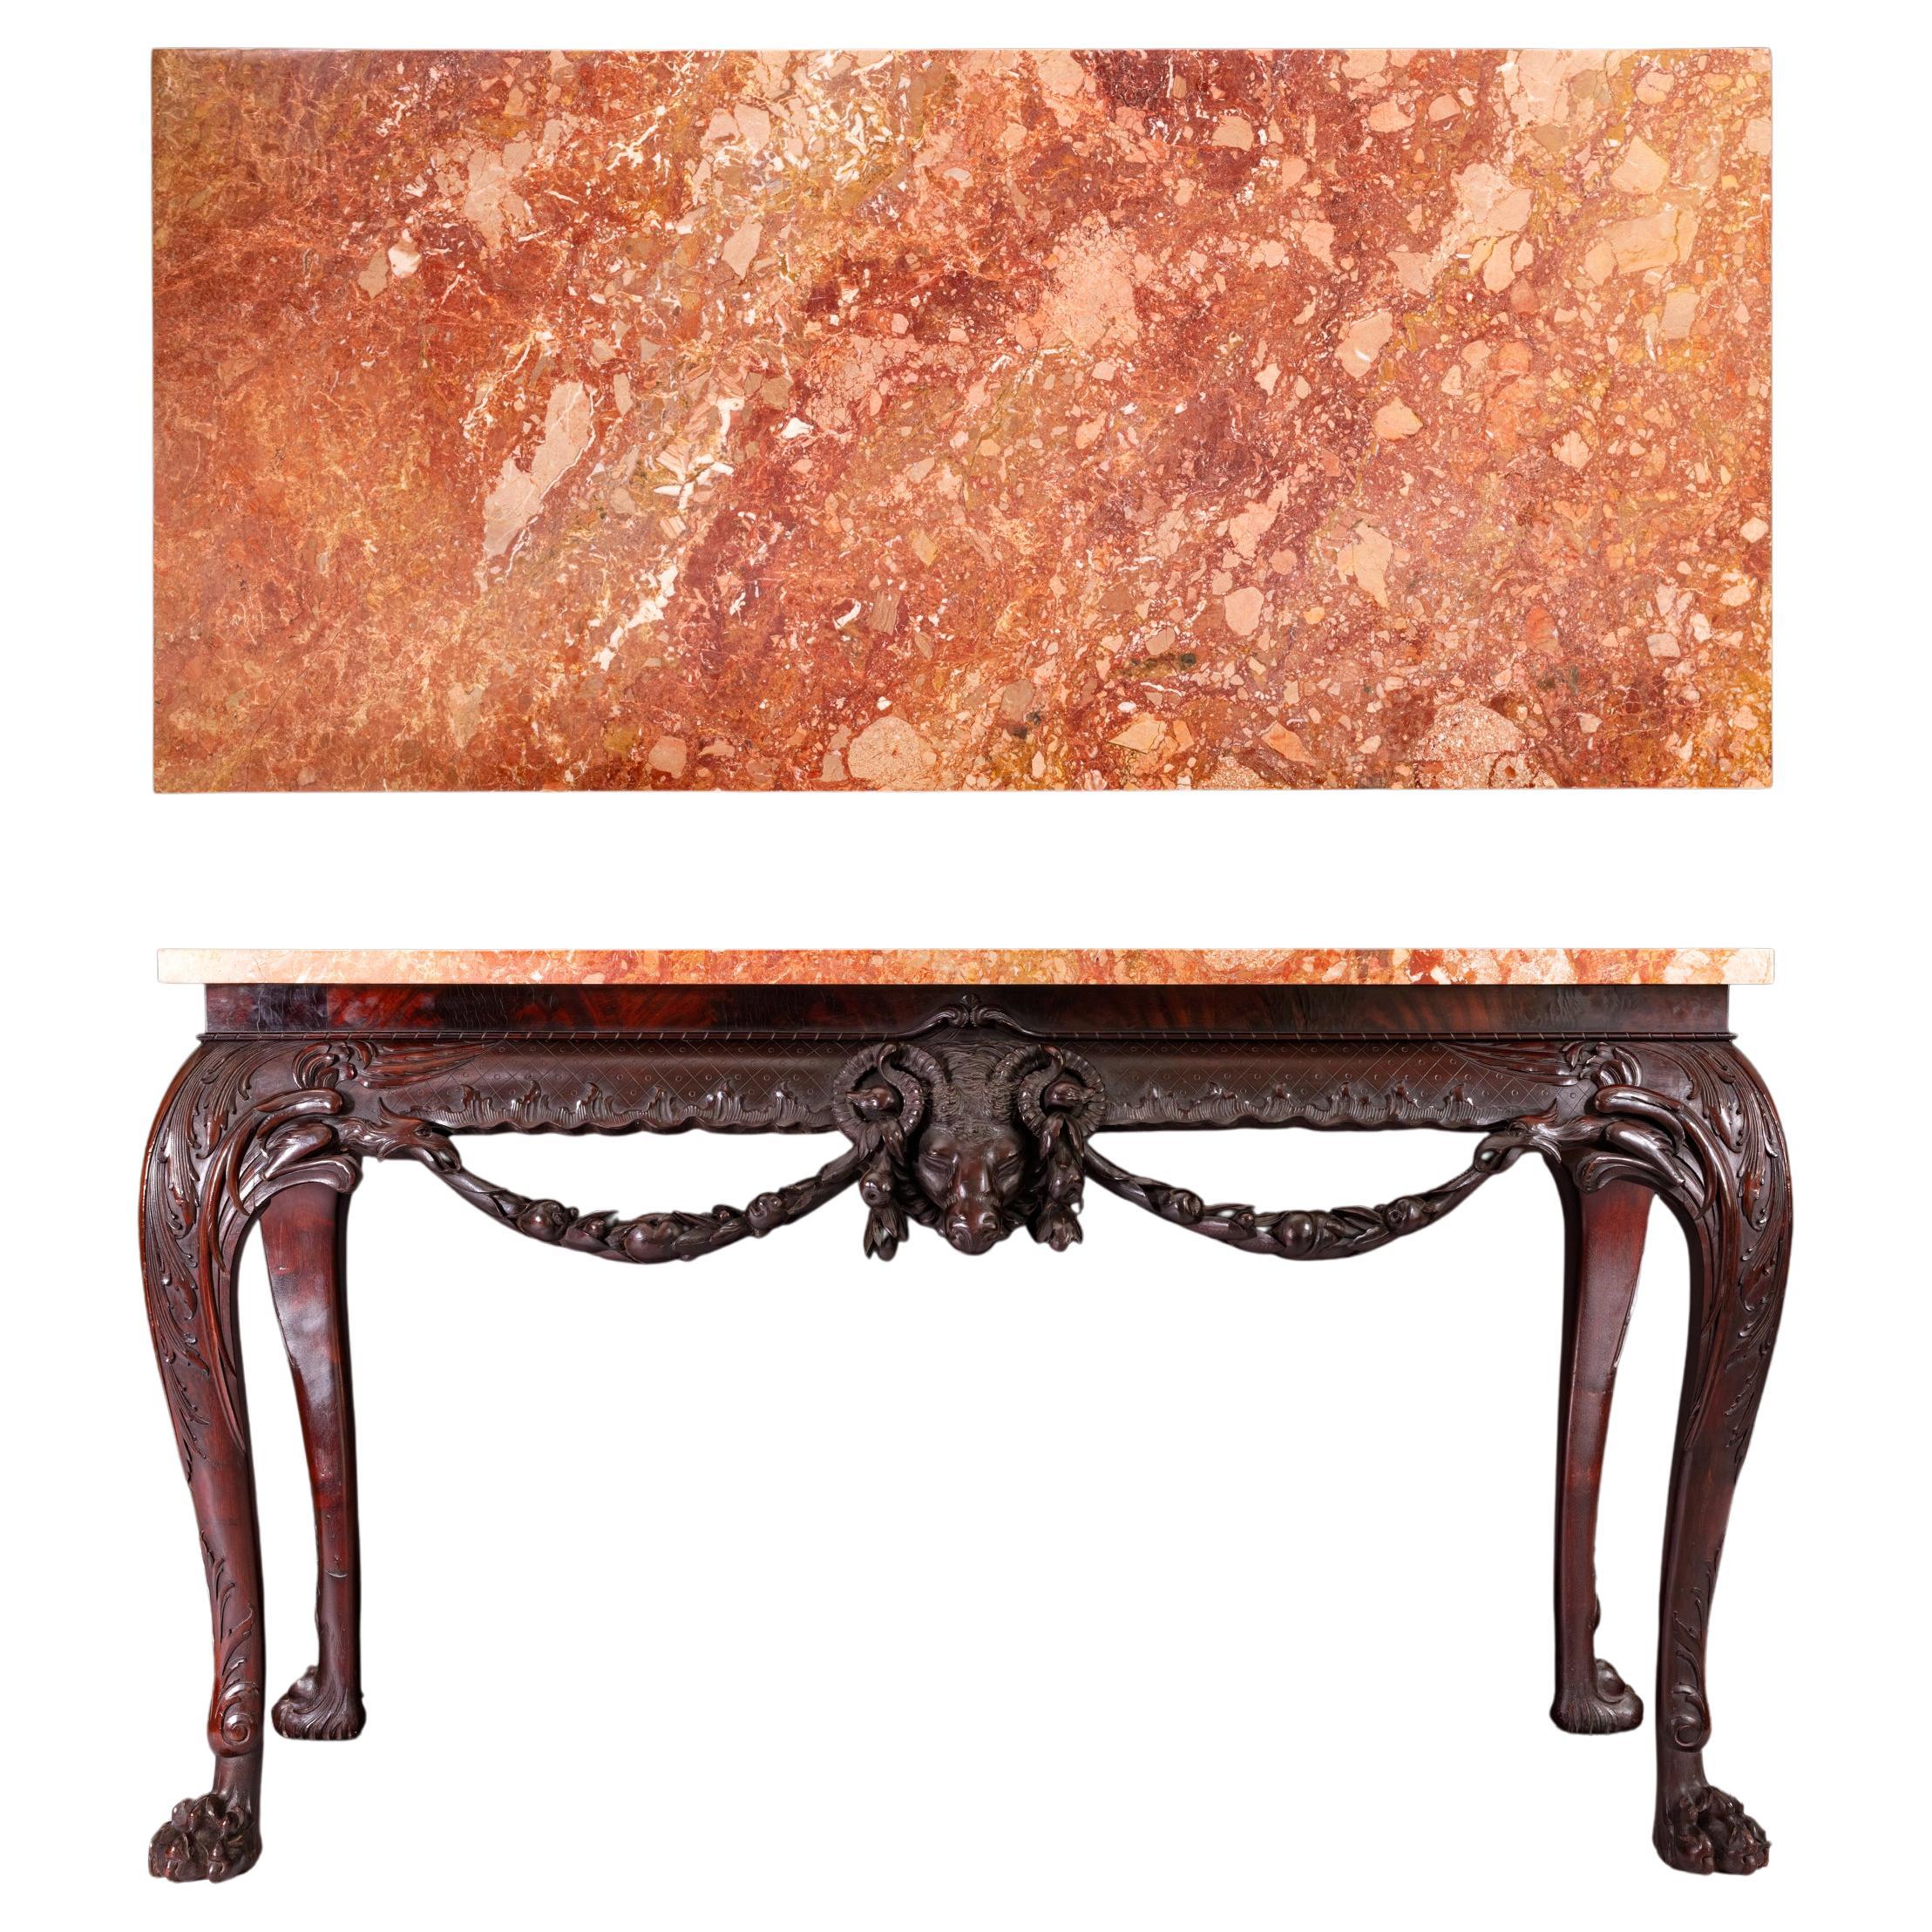 19th Century Irish Marble Top Console Table In the George III Style For Sale